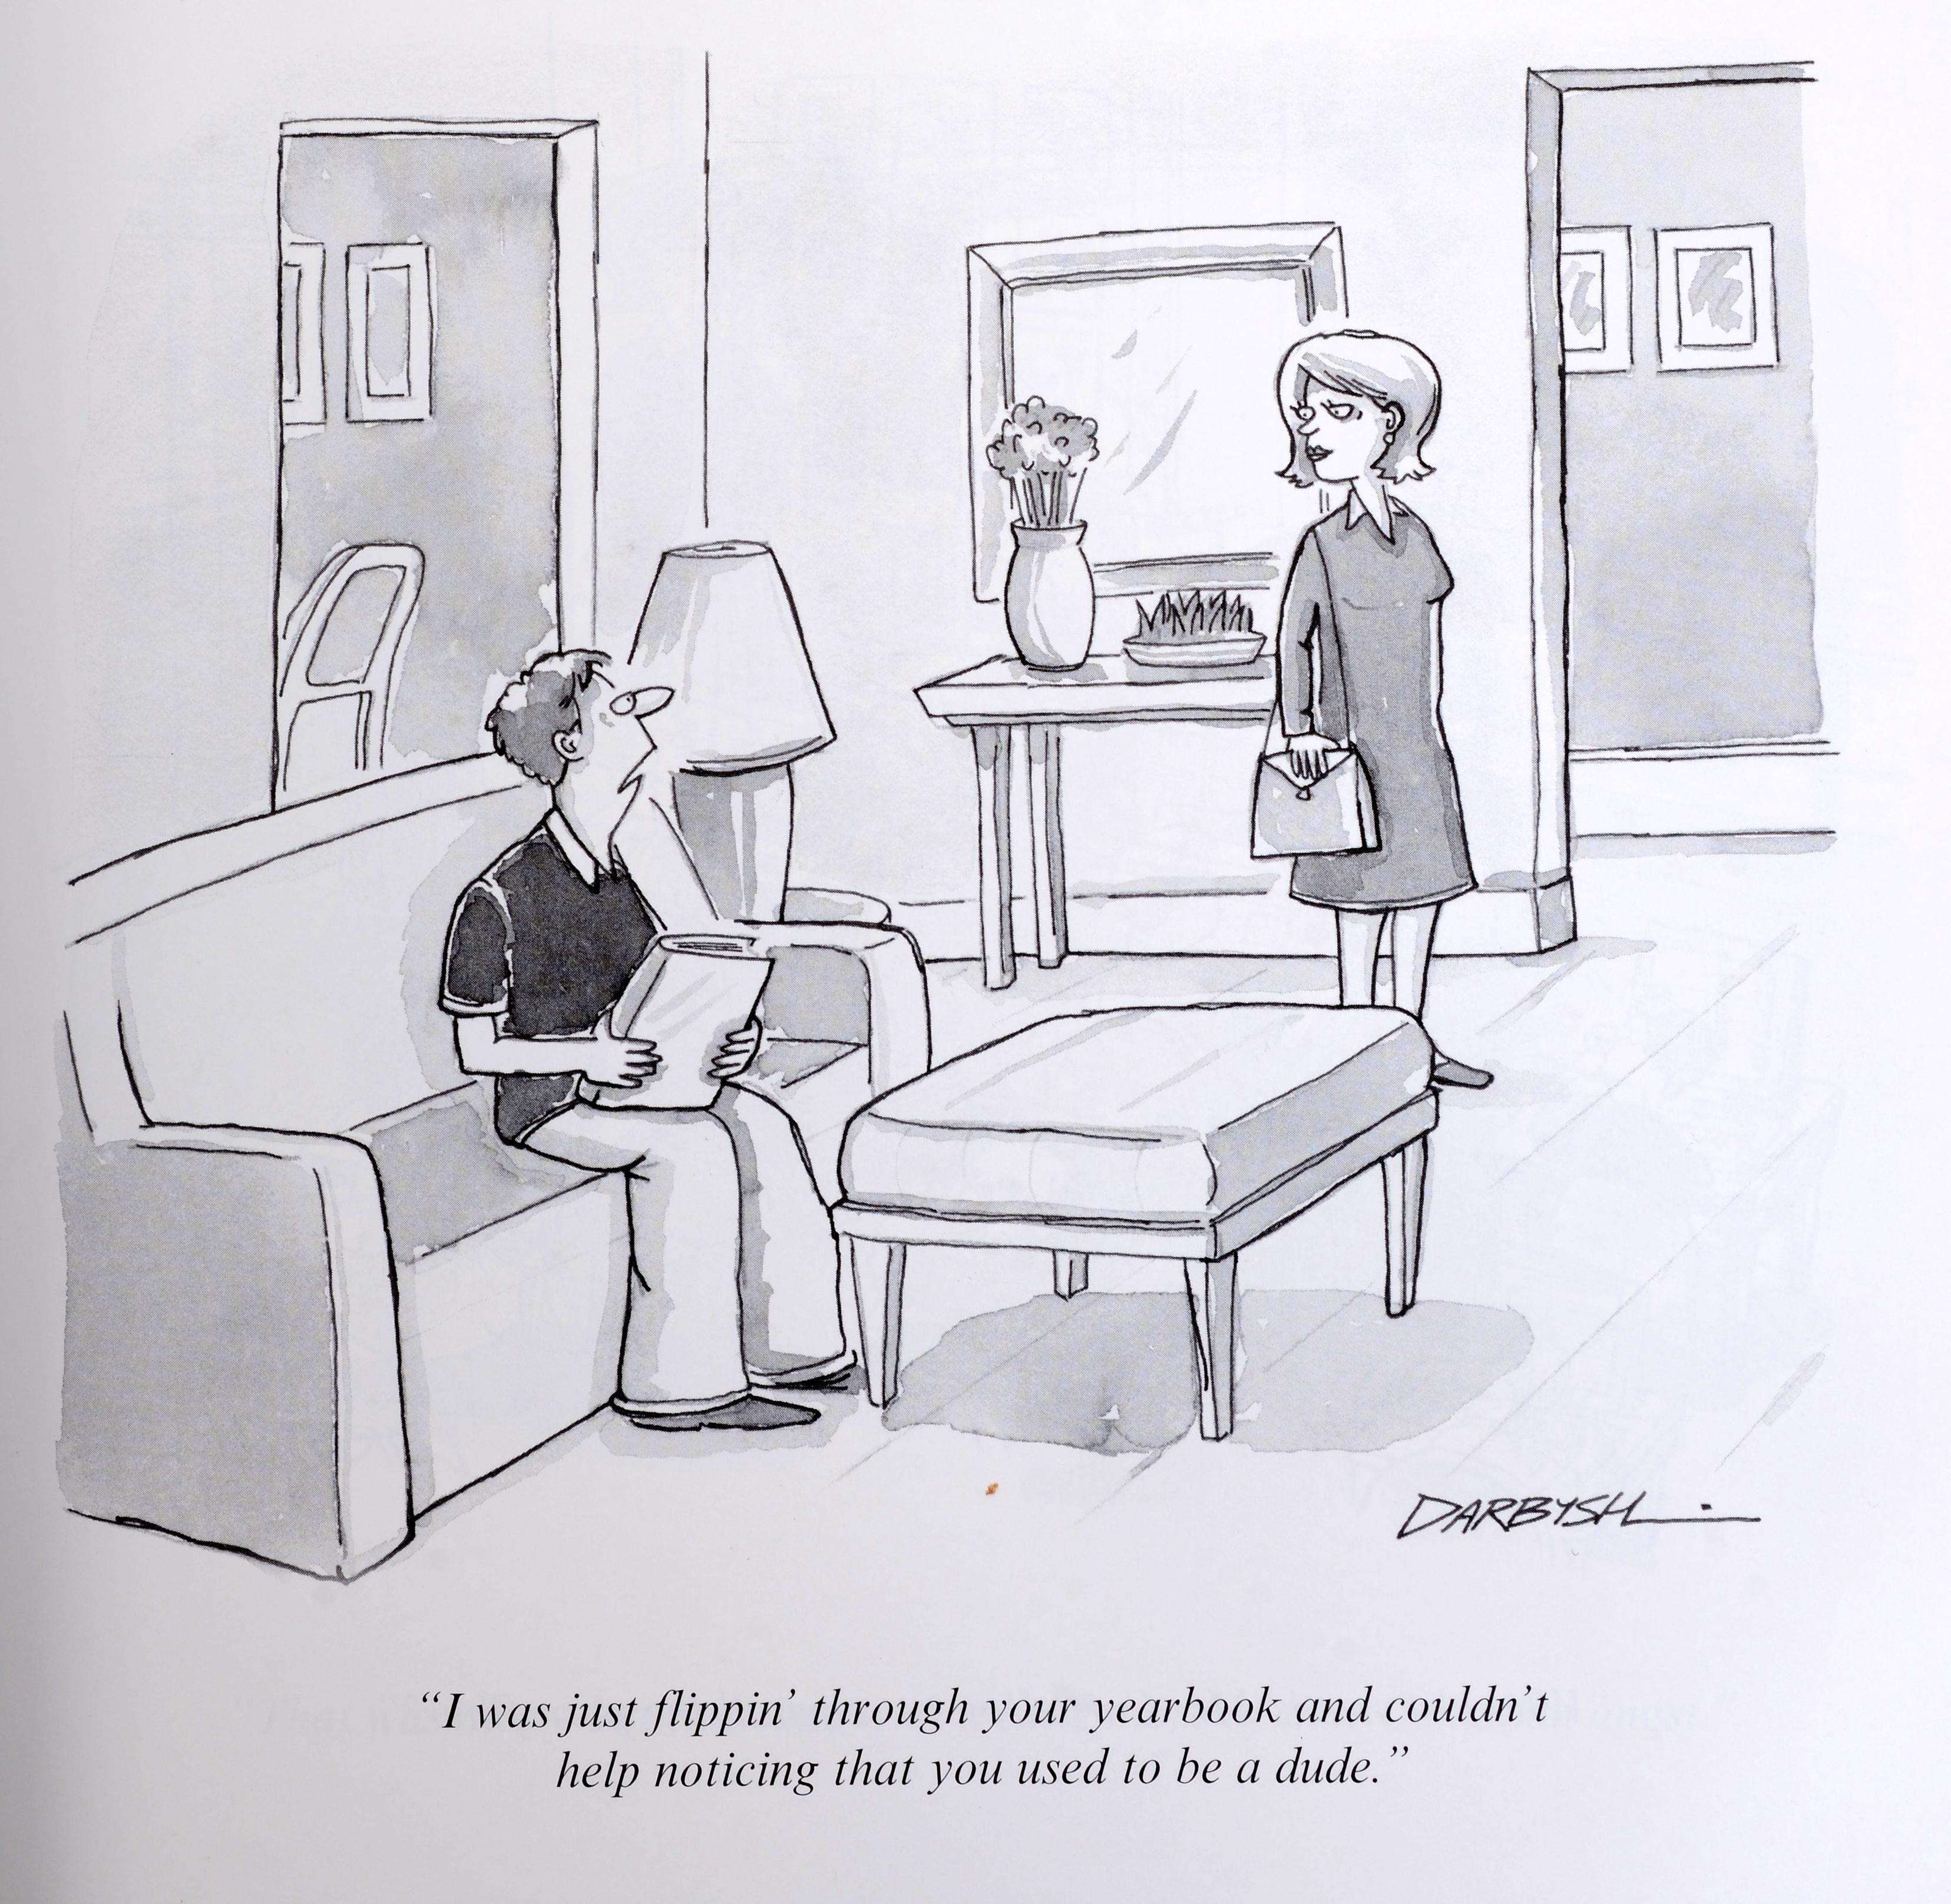 Paper The Rejection Collection: Cartoons You Never Saw, & Never Will See in New Yorker For Sale